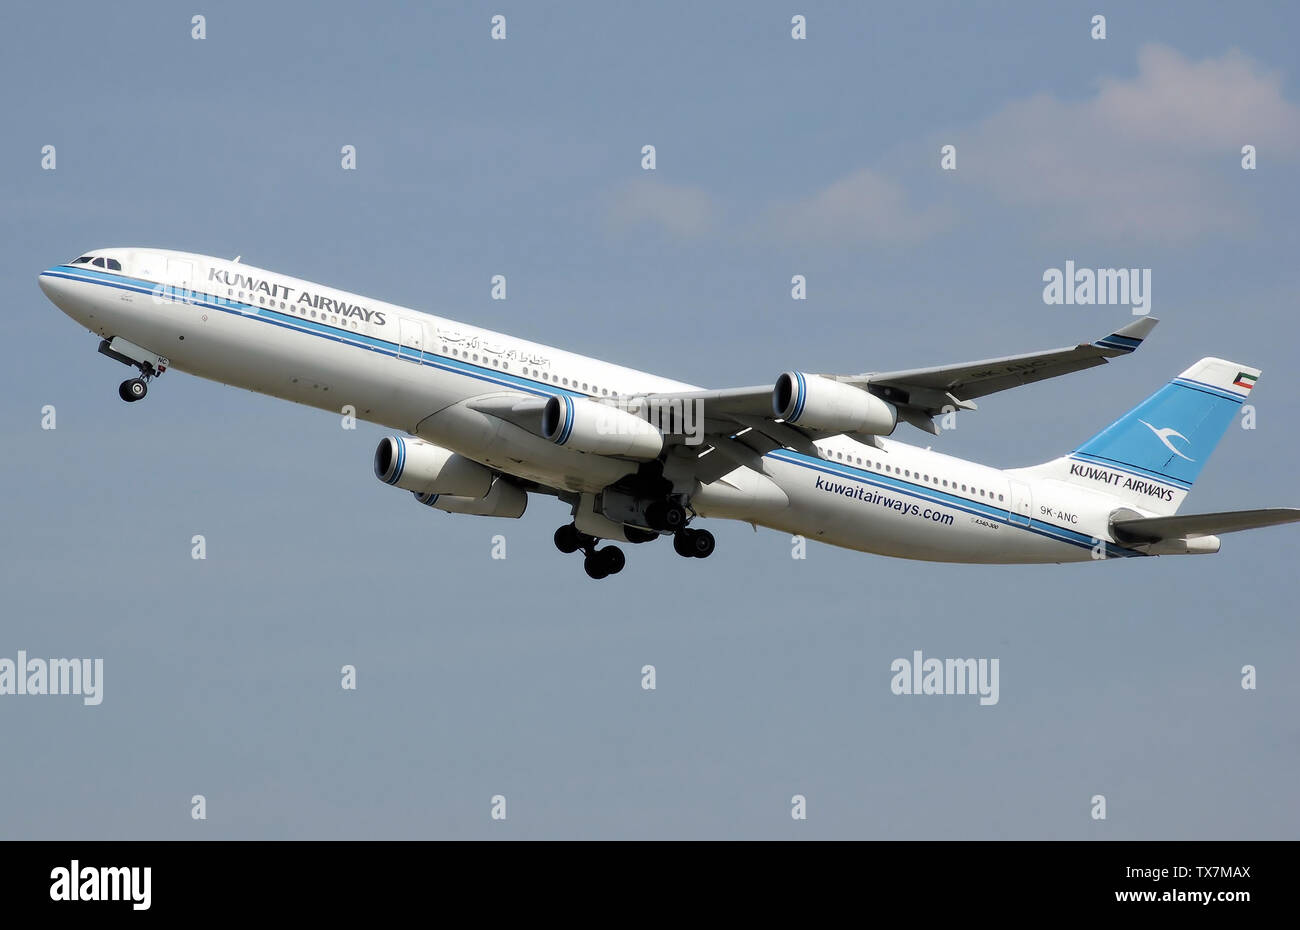 Kuwait Airways Airbus A340-300 (9K-ANC) takes off from London Heathrow Airport. The nosewheel is beginning to retract.; August 2007; Own work; Adrian Pingstone (Arpingstone); Stock Photo